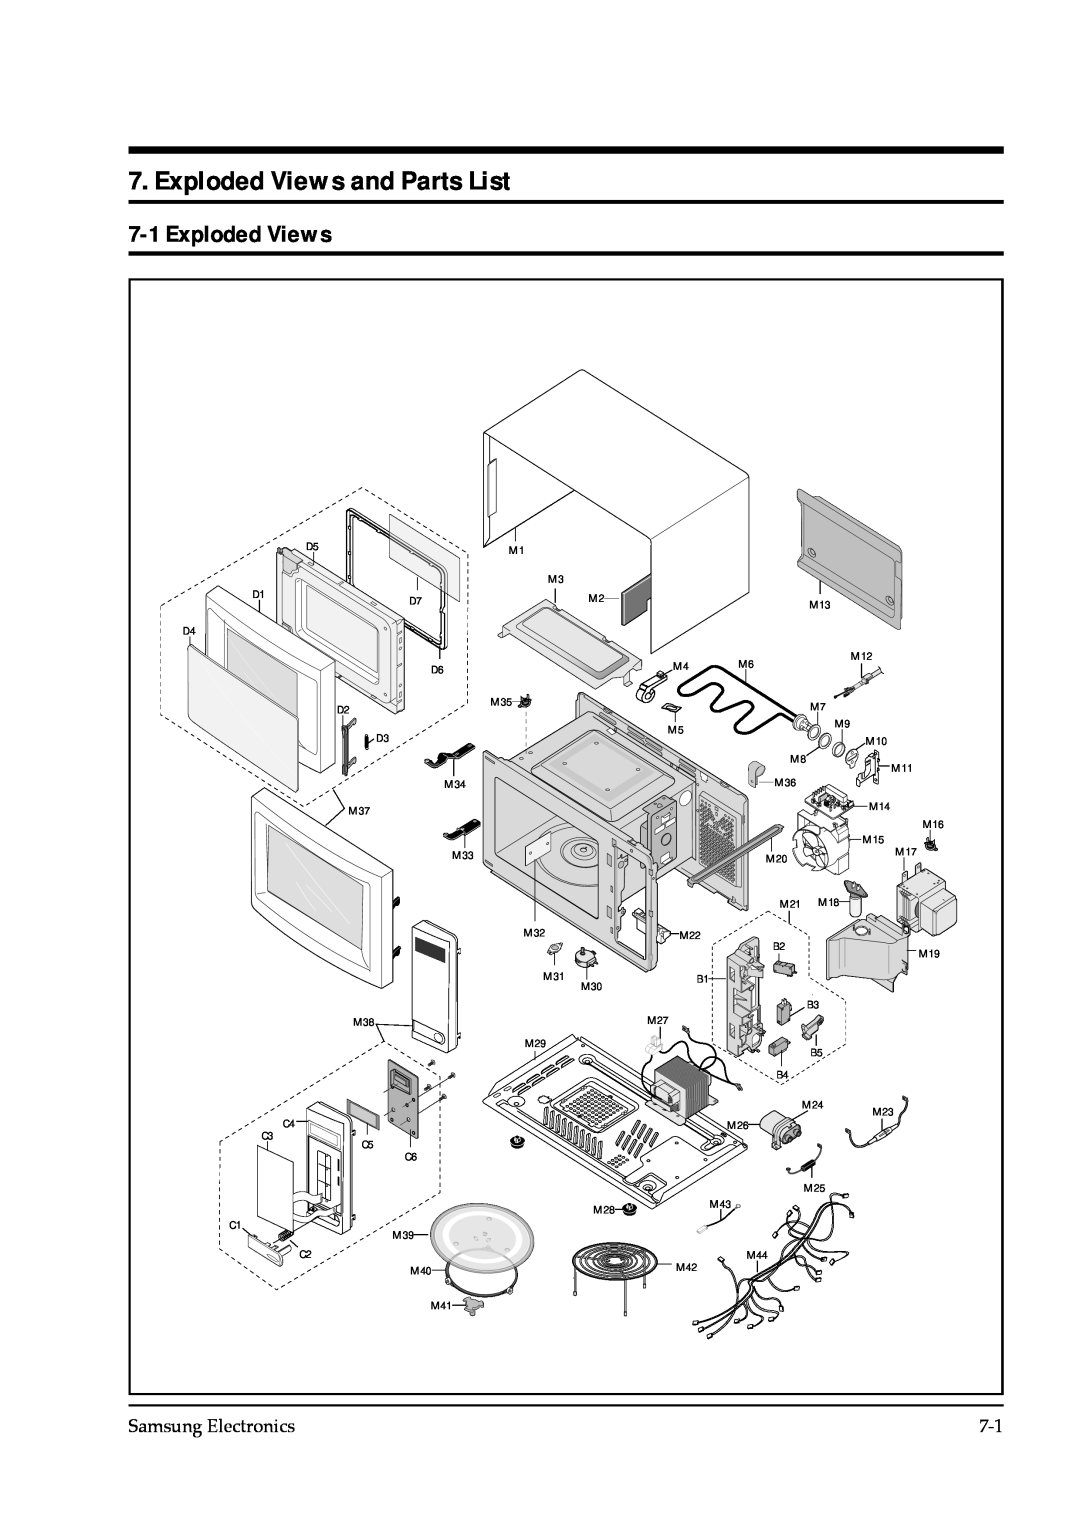 Samsung CE745GR service manual Exploded Views and Parts List, Samsung Electronics 